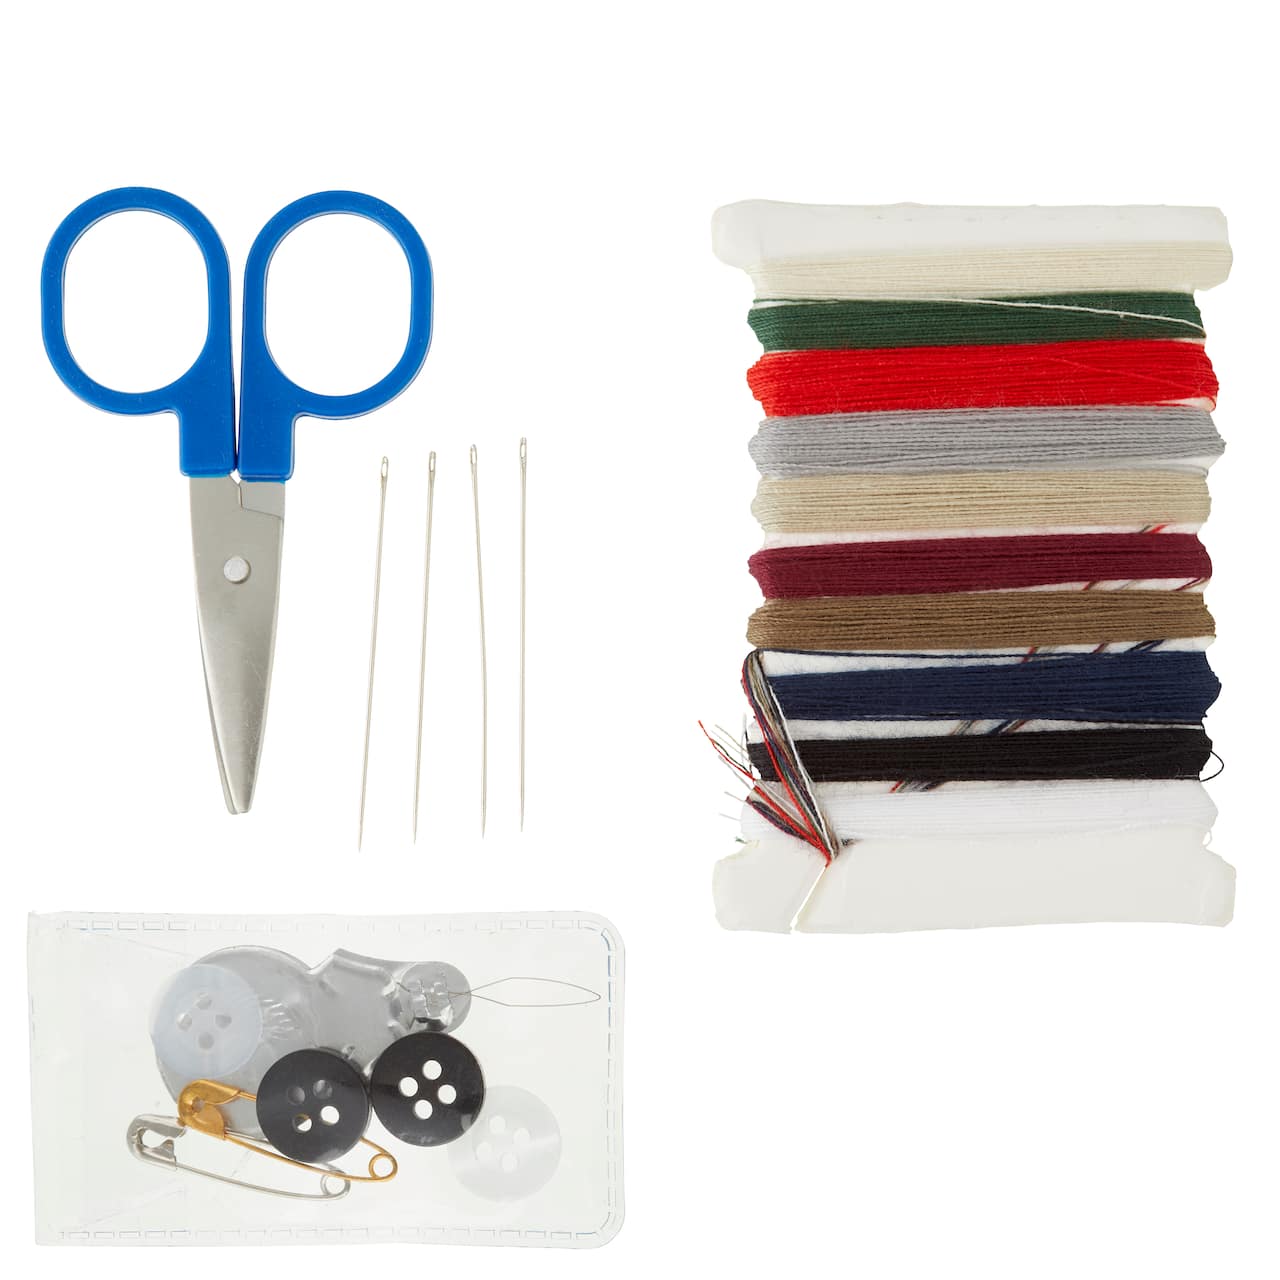 Loops & Threads™ Sewing Kit